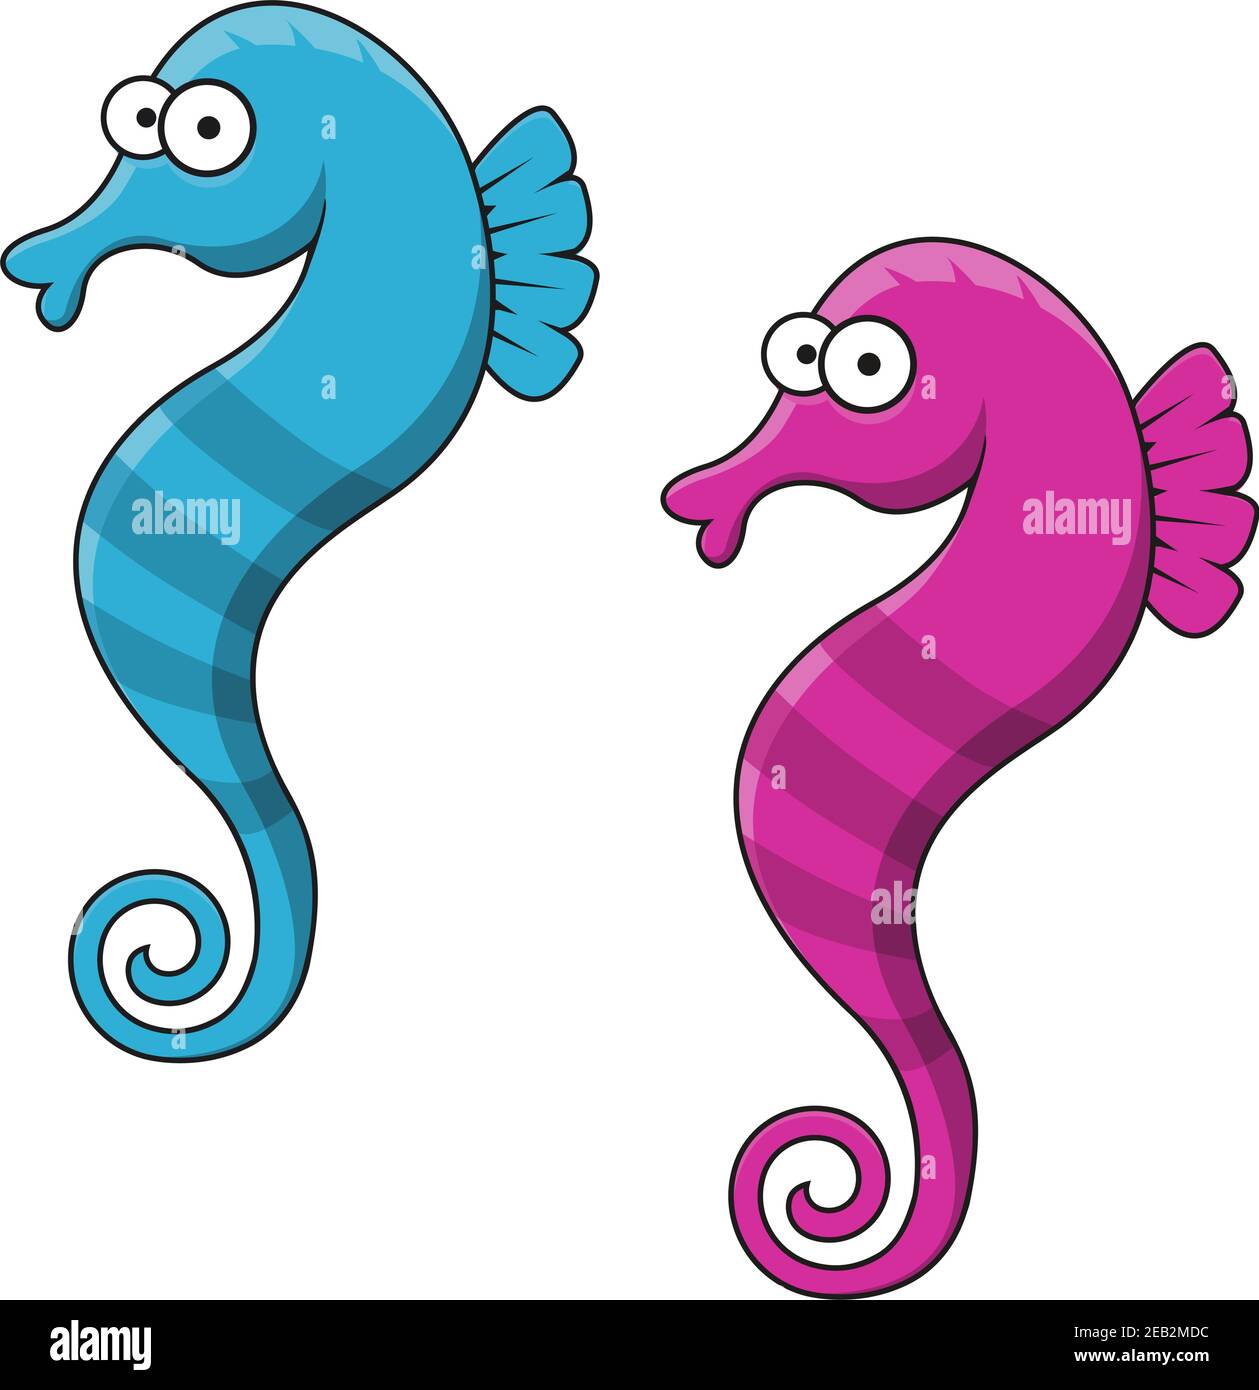 Funny striped blue and pink seahorse fishes cartoon characters with decorative wavy fins for underwater wildlife or aquarium mascot design Stock Vector